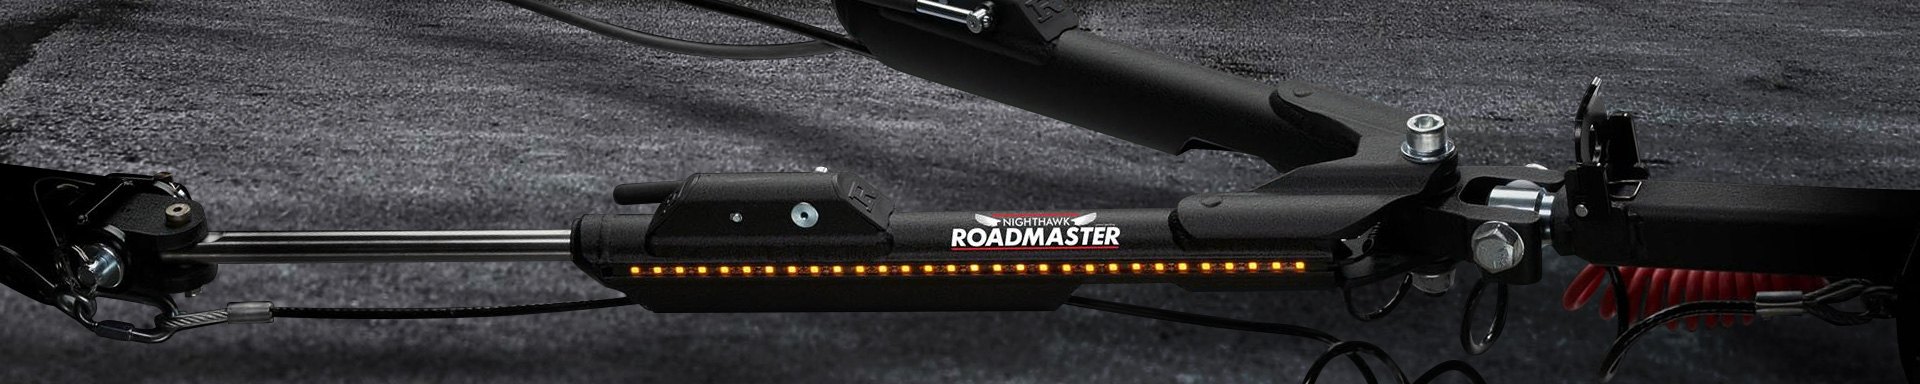 Roadmaster Electrical